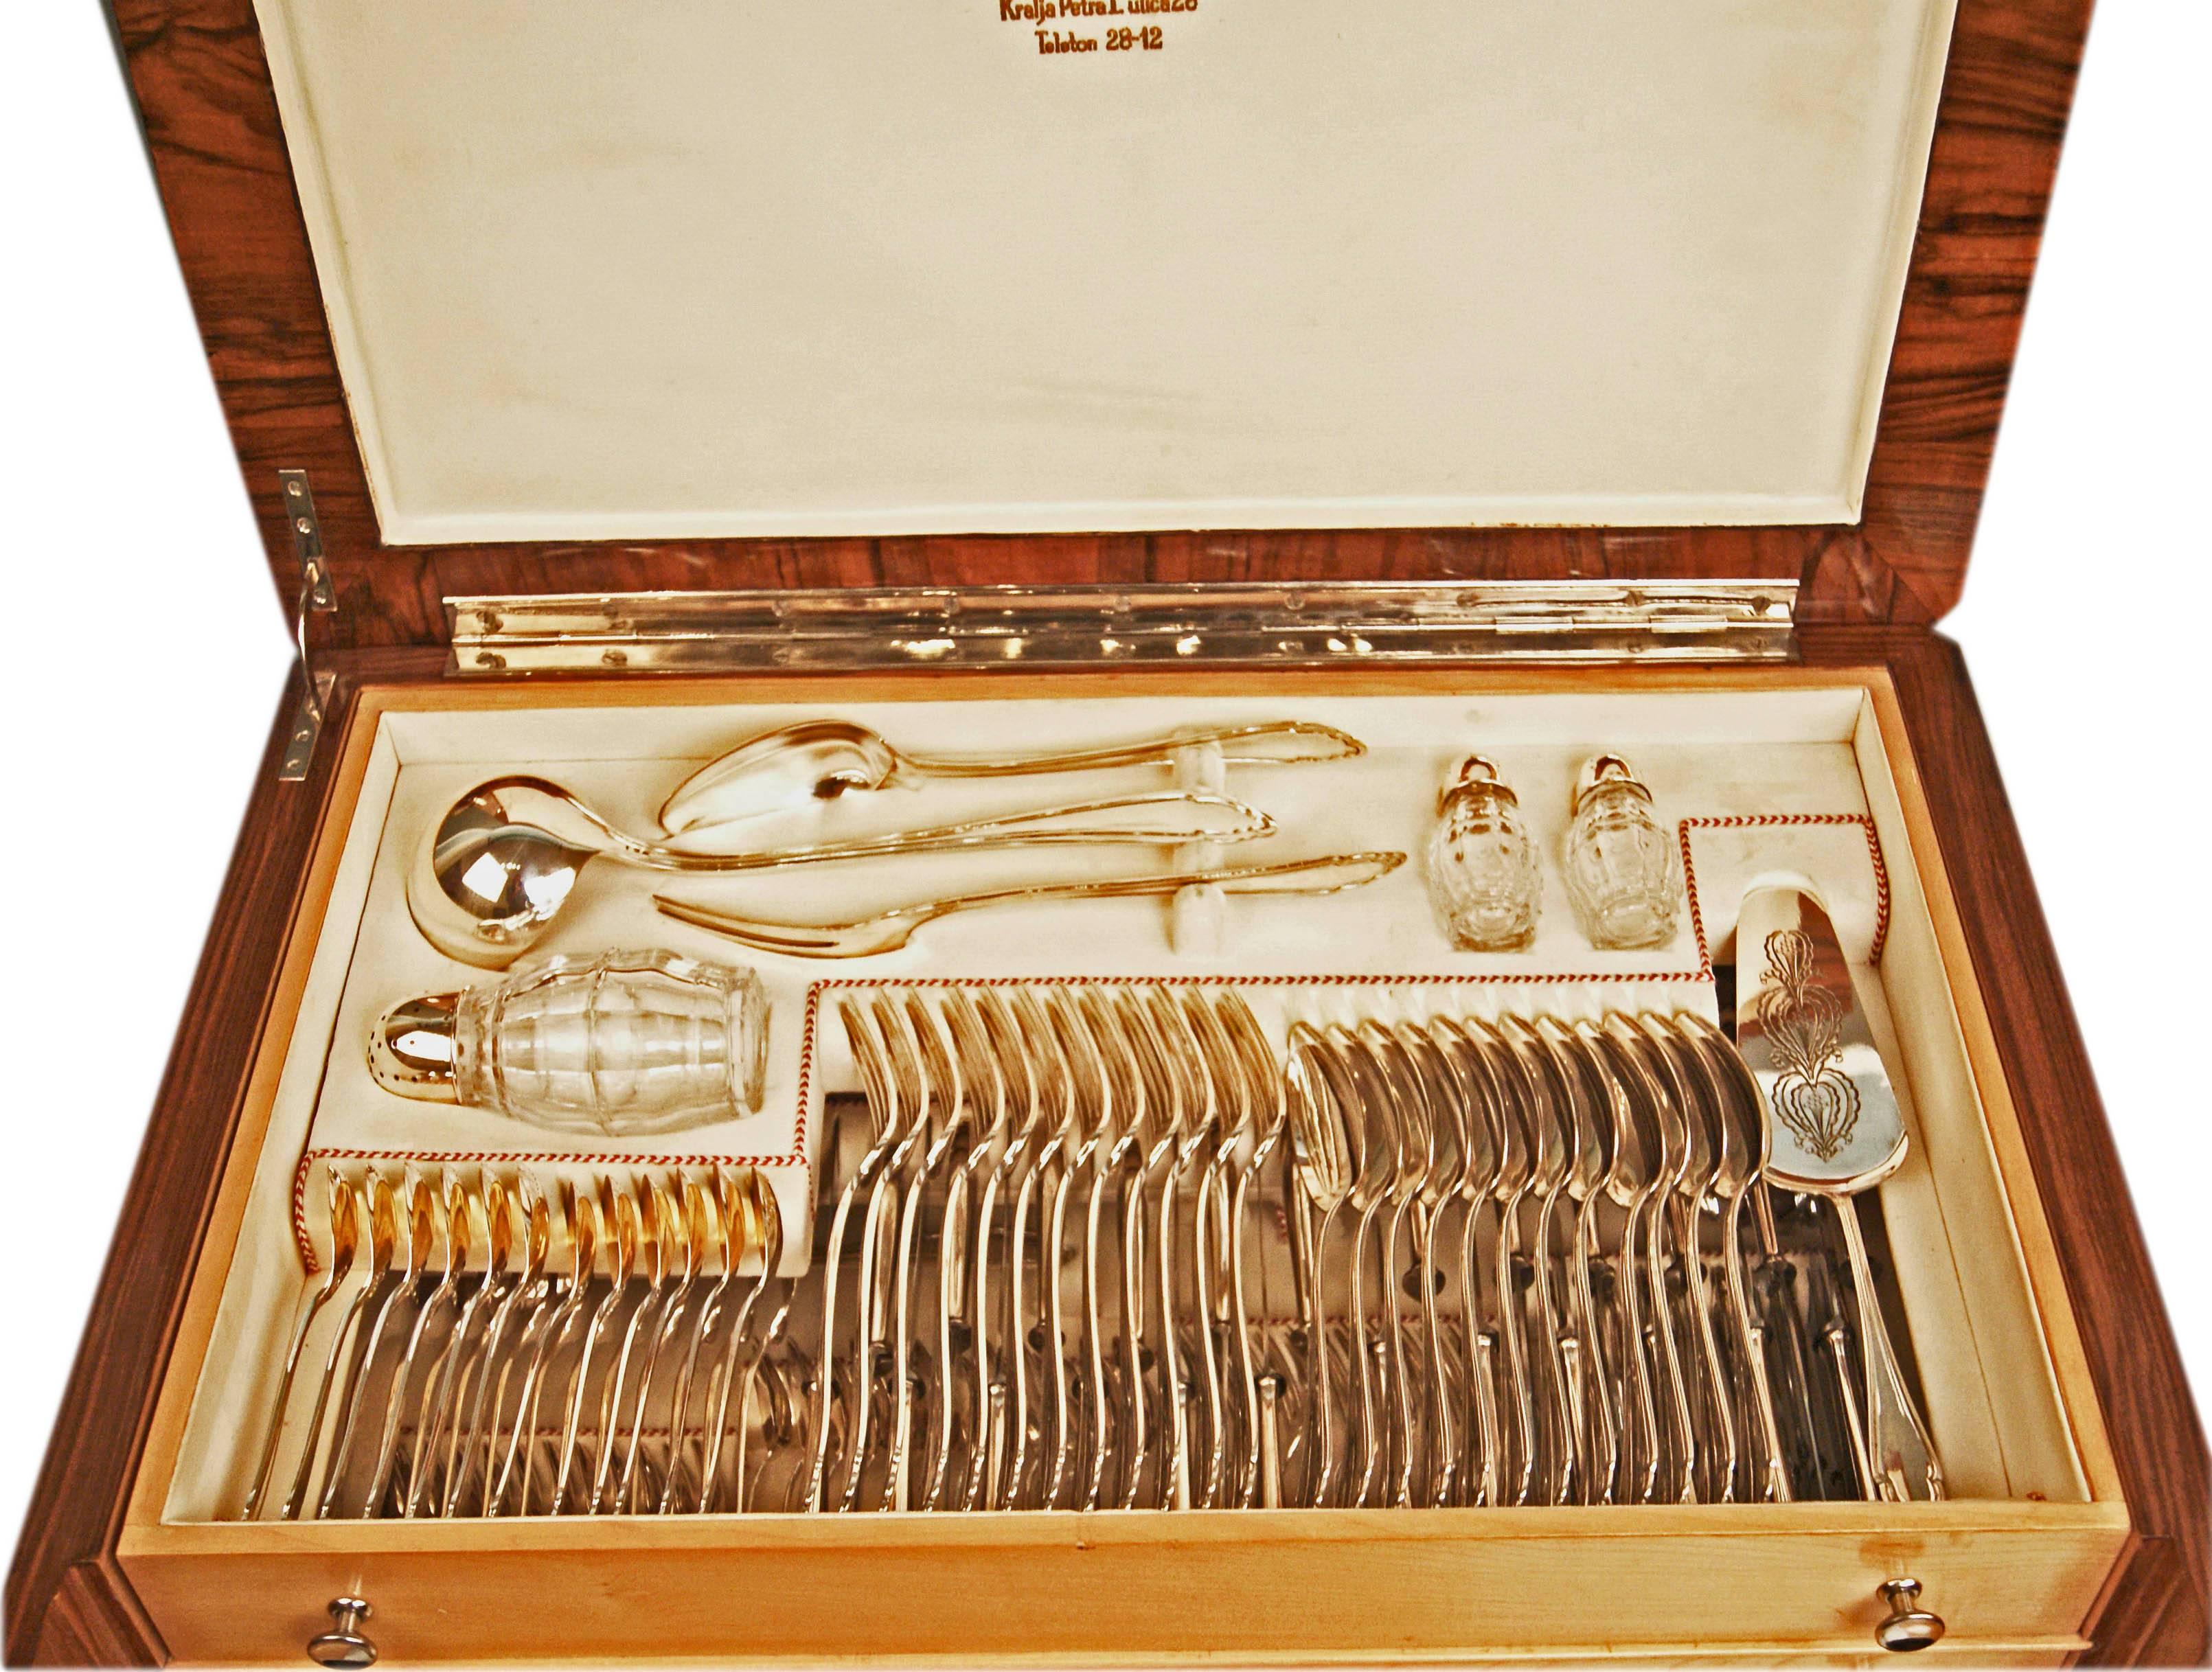 SILVER 800 FLATWARE (CUTLERY SET) FOR 12 PERSONS,
made by KLINKOSCH / Vienna, Austria, circa 1890 - 1900

Austrian finest cutlery set / flatware / dinnerware of best manufacturing quality, 
consisting of 191 pieces. Silver 800 / form